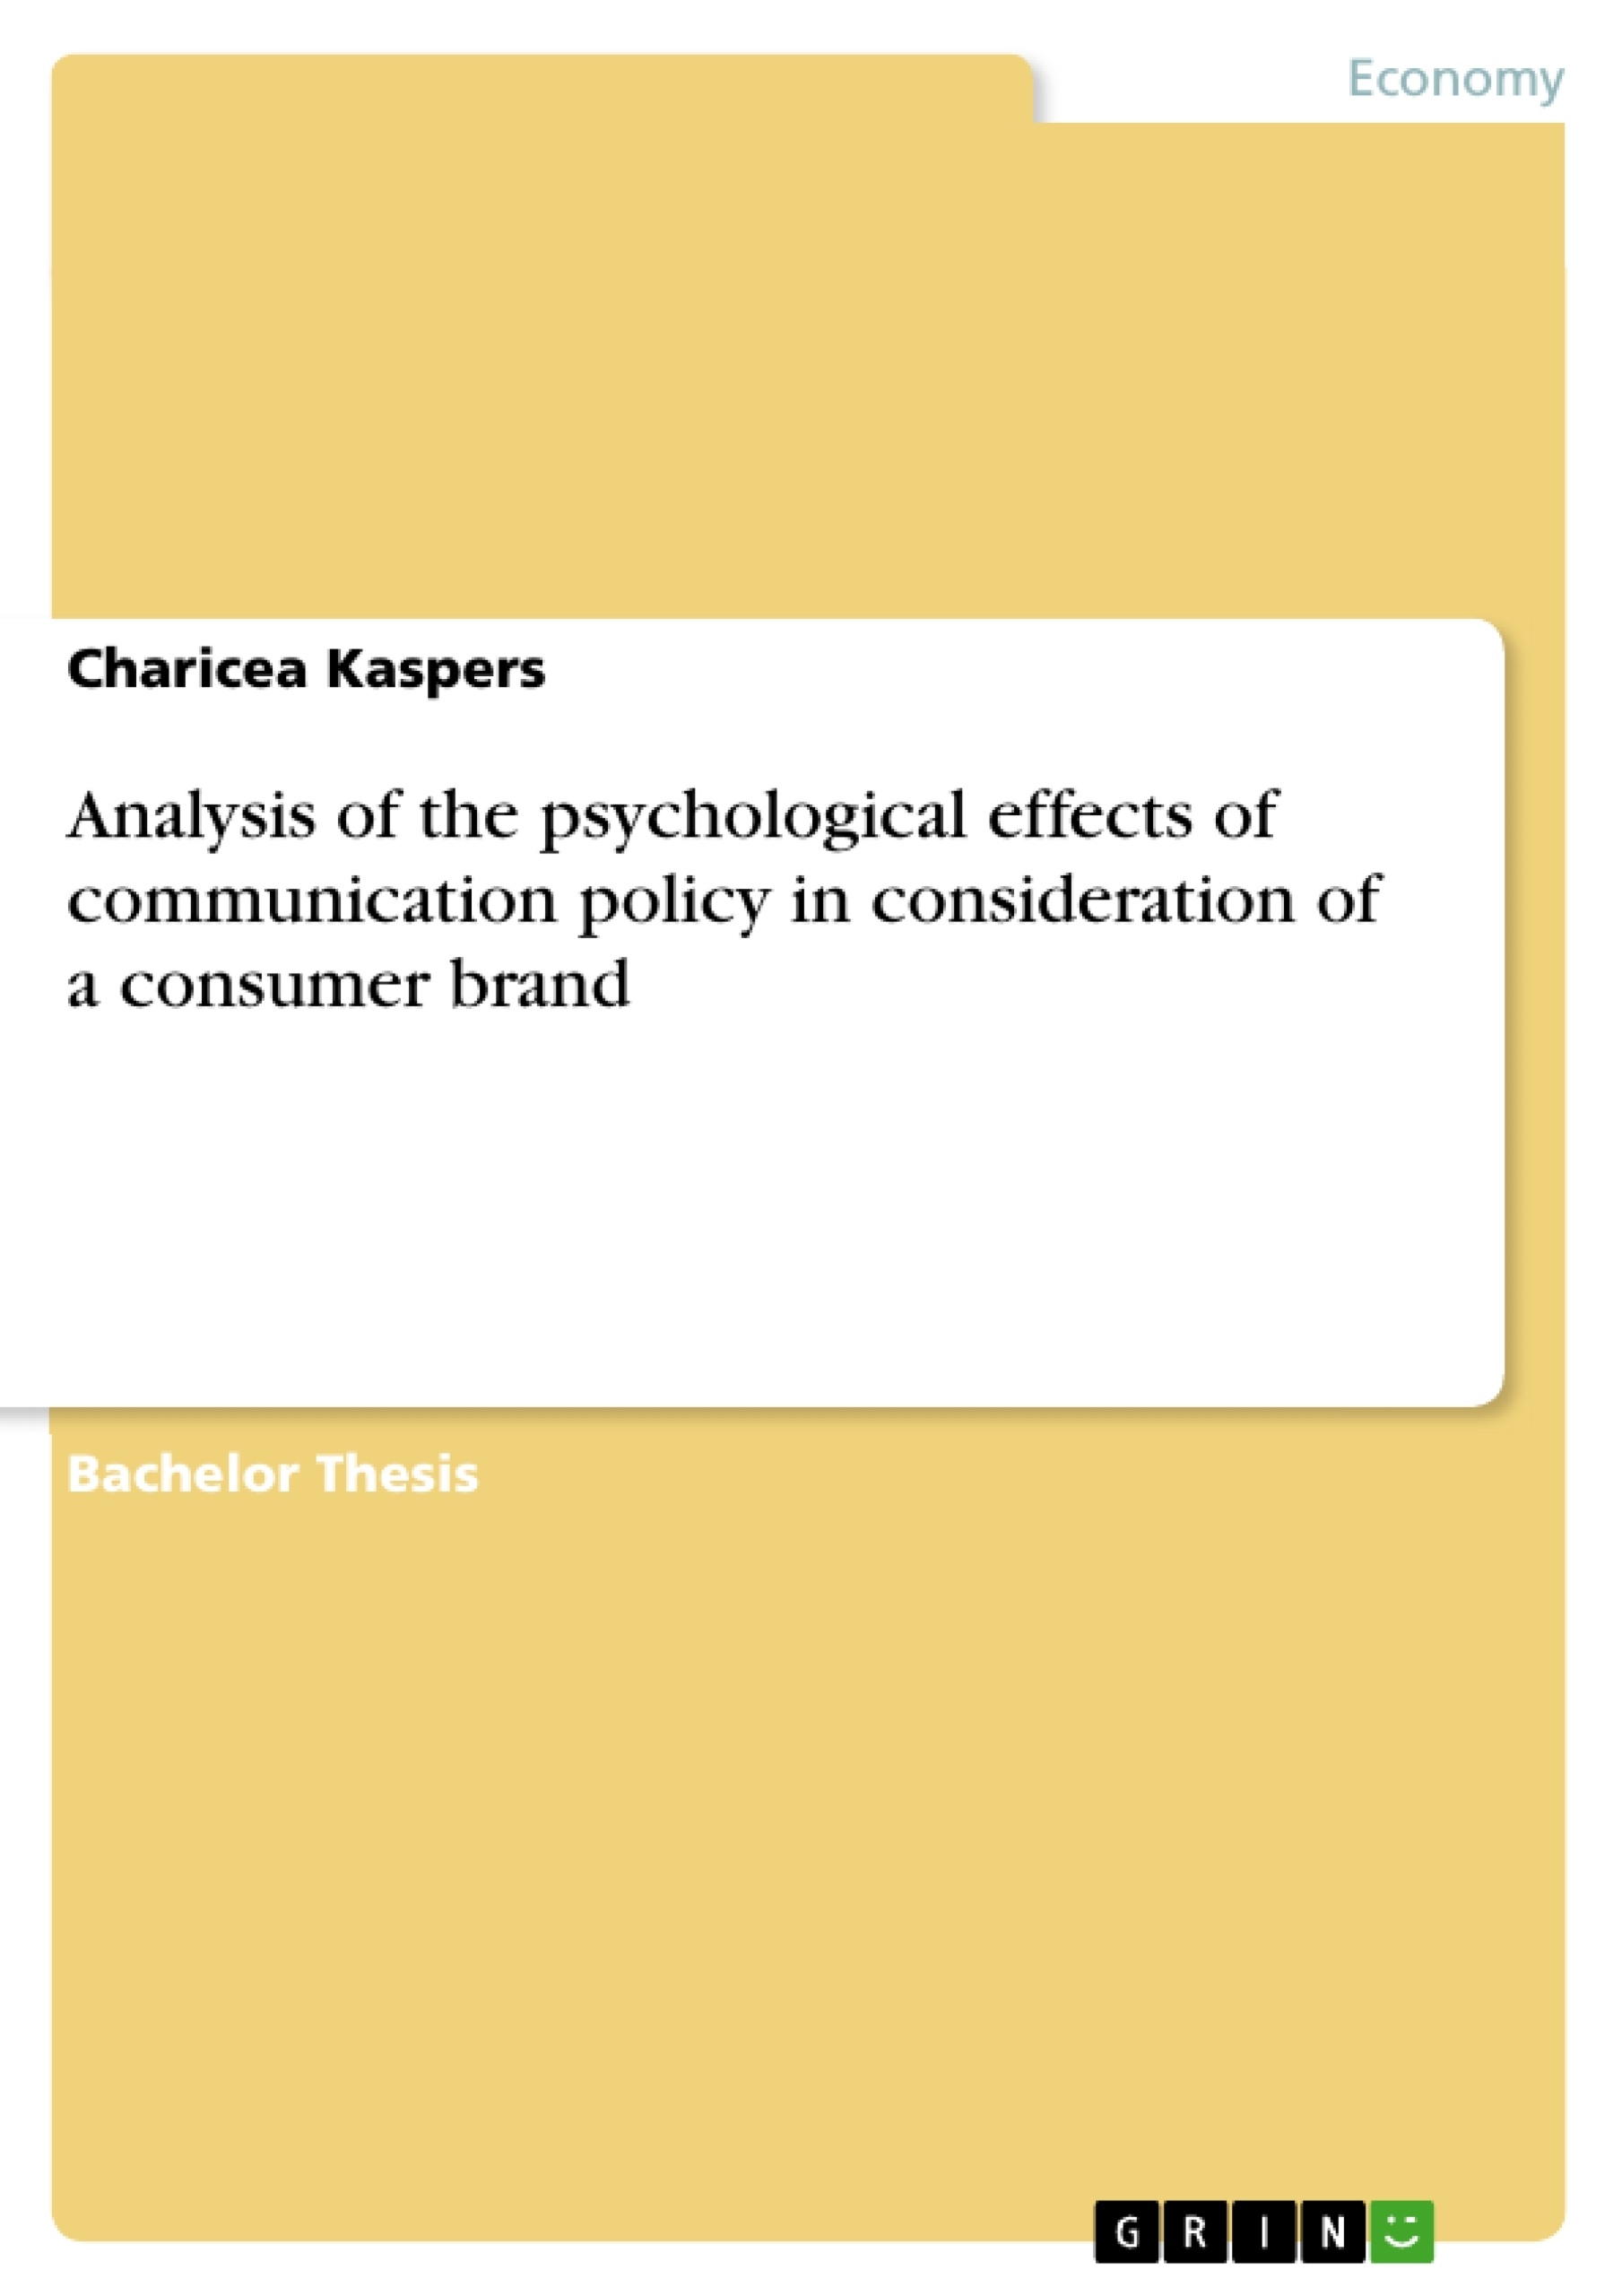 Title: Analysis of the psychological effects of communication policy in consideration of a consumer brand